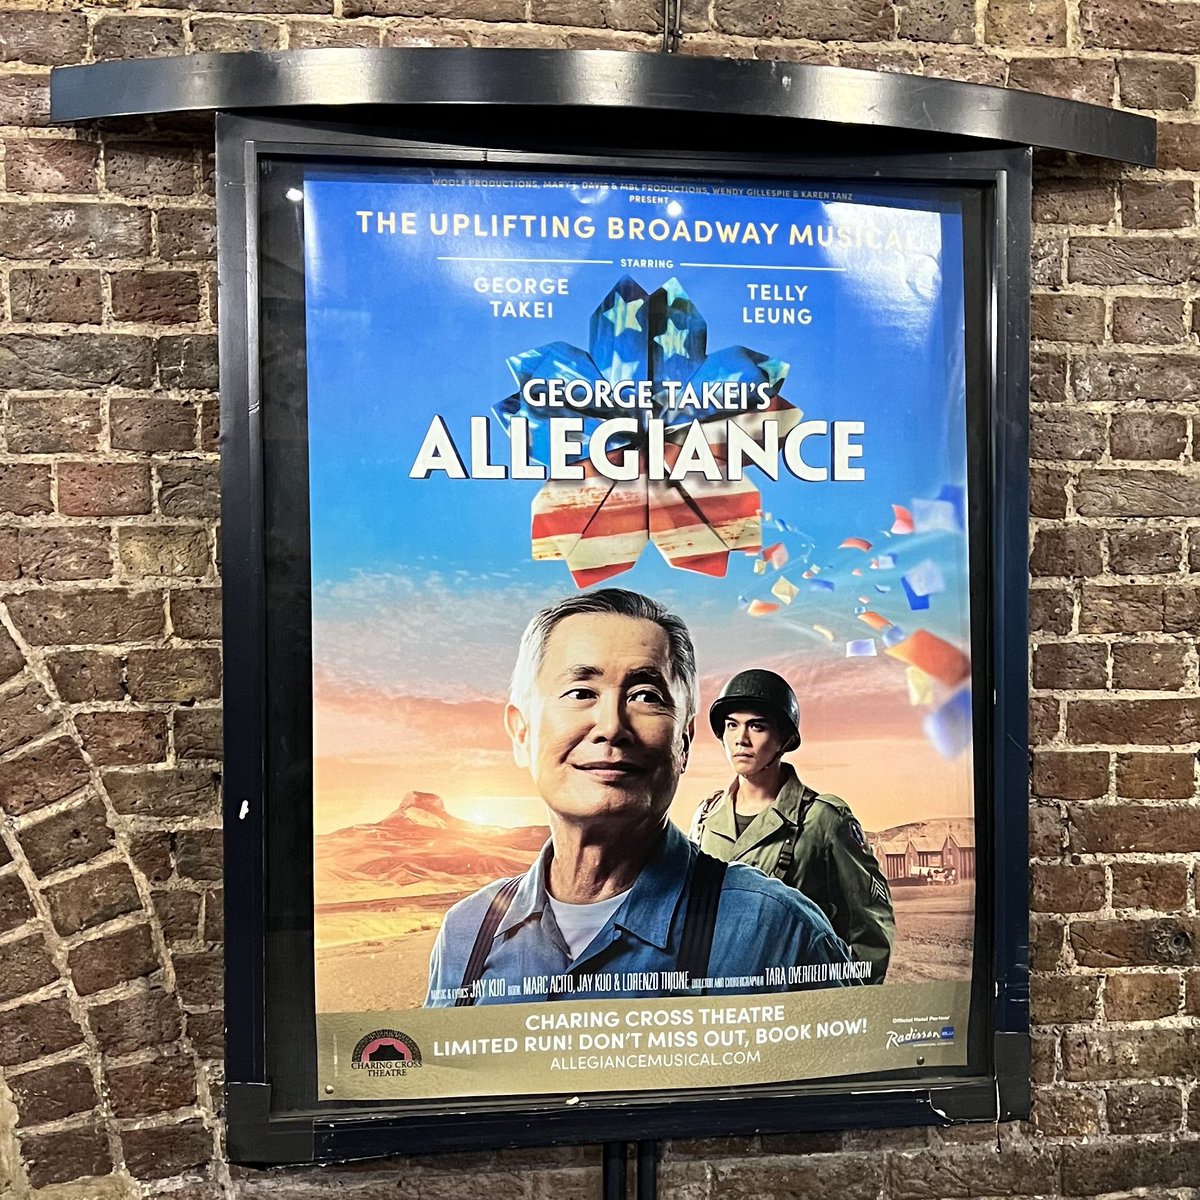 Loved @allegiancebway with @GeorgeTakei & @tellyleung. An emotional story beautifully told and wonderfully performed.

Go see it at @CharingCrossThr!
⭐️⭐️⭐️⭐️⭐️